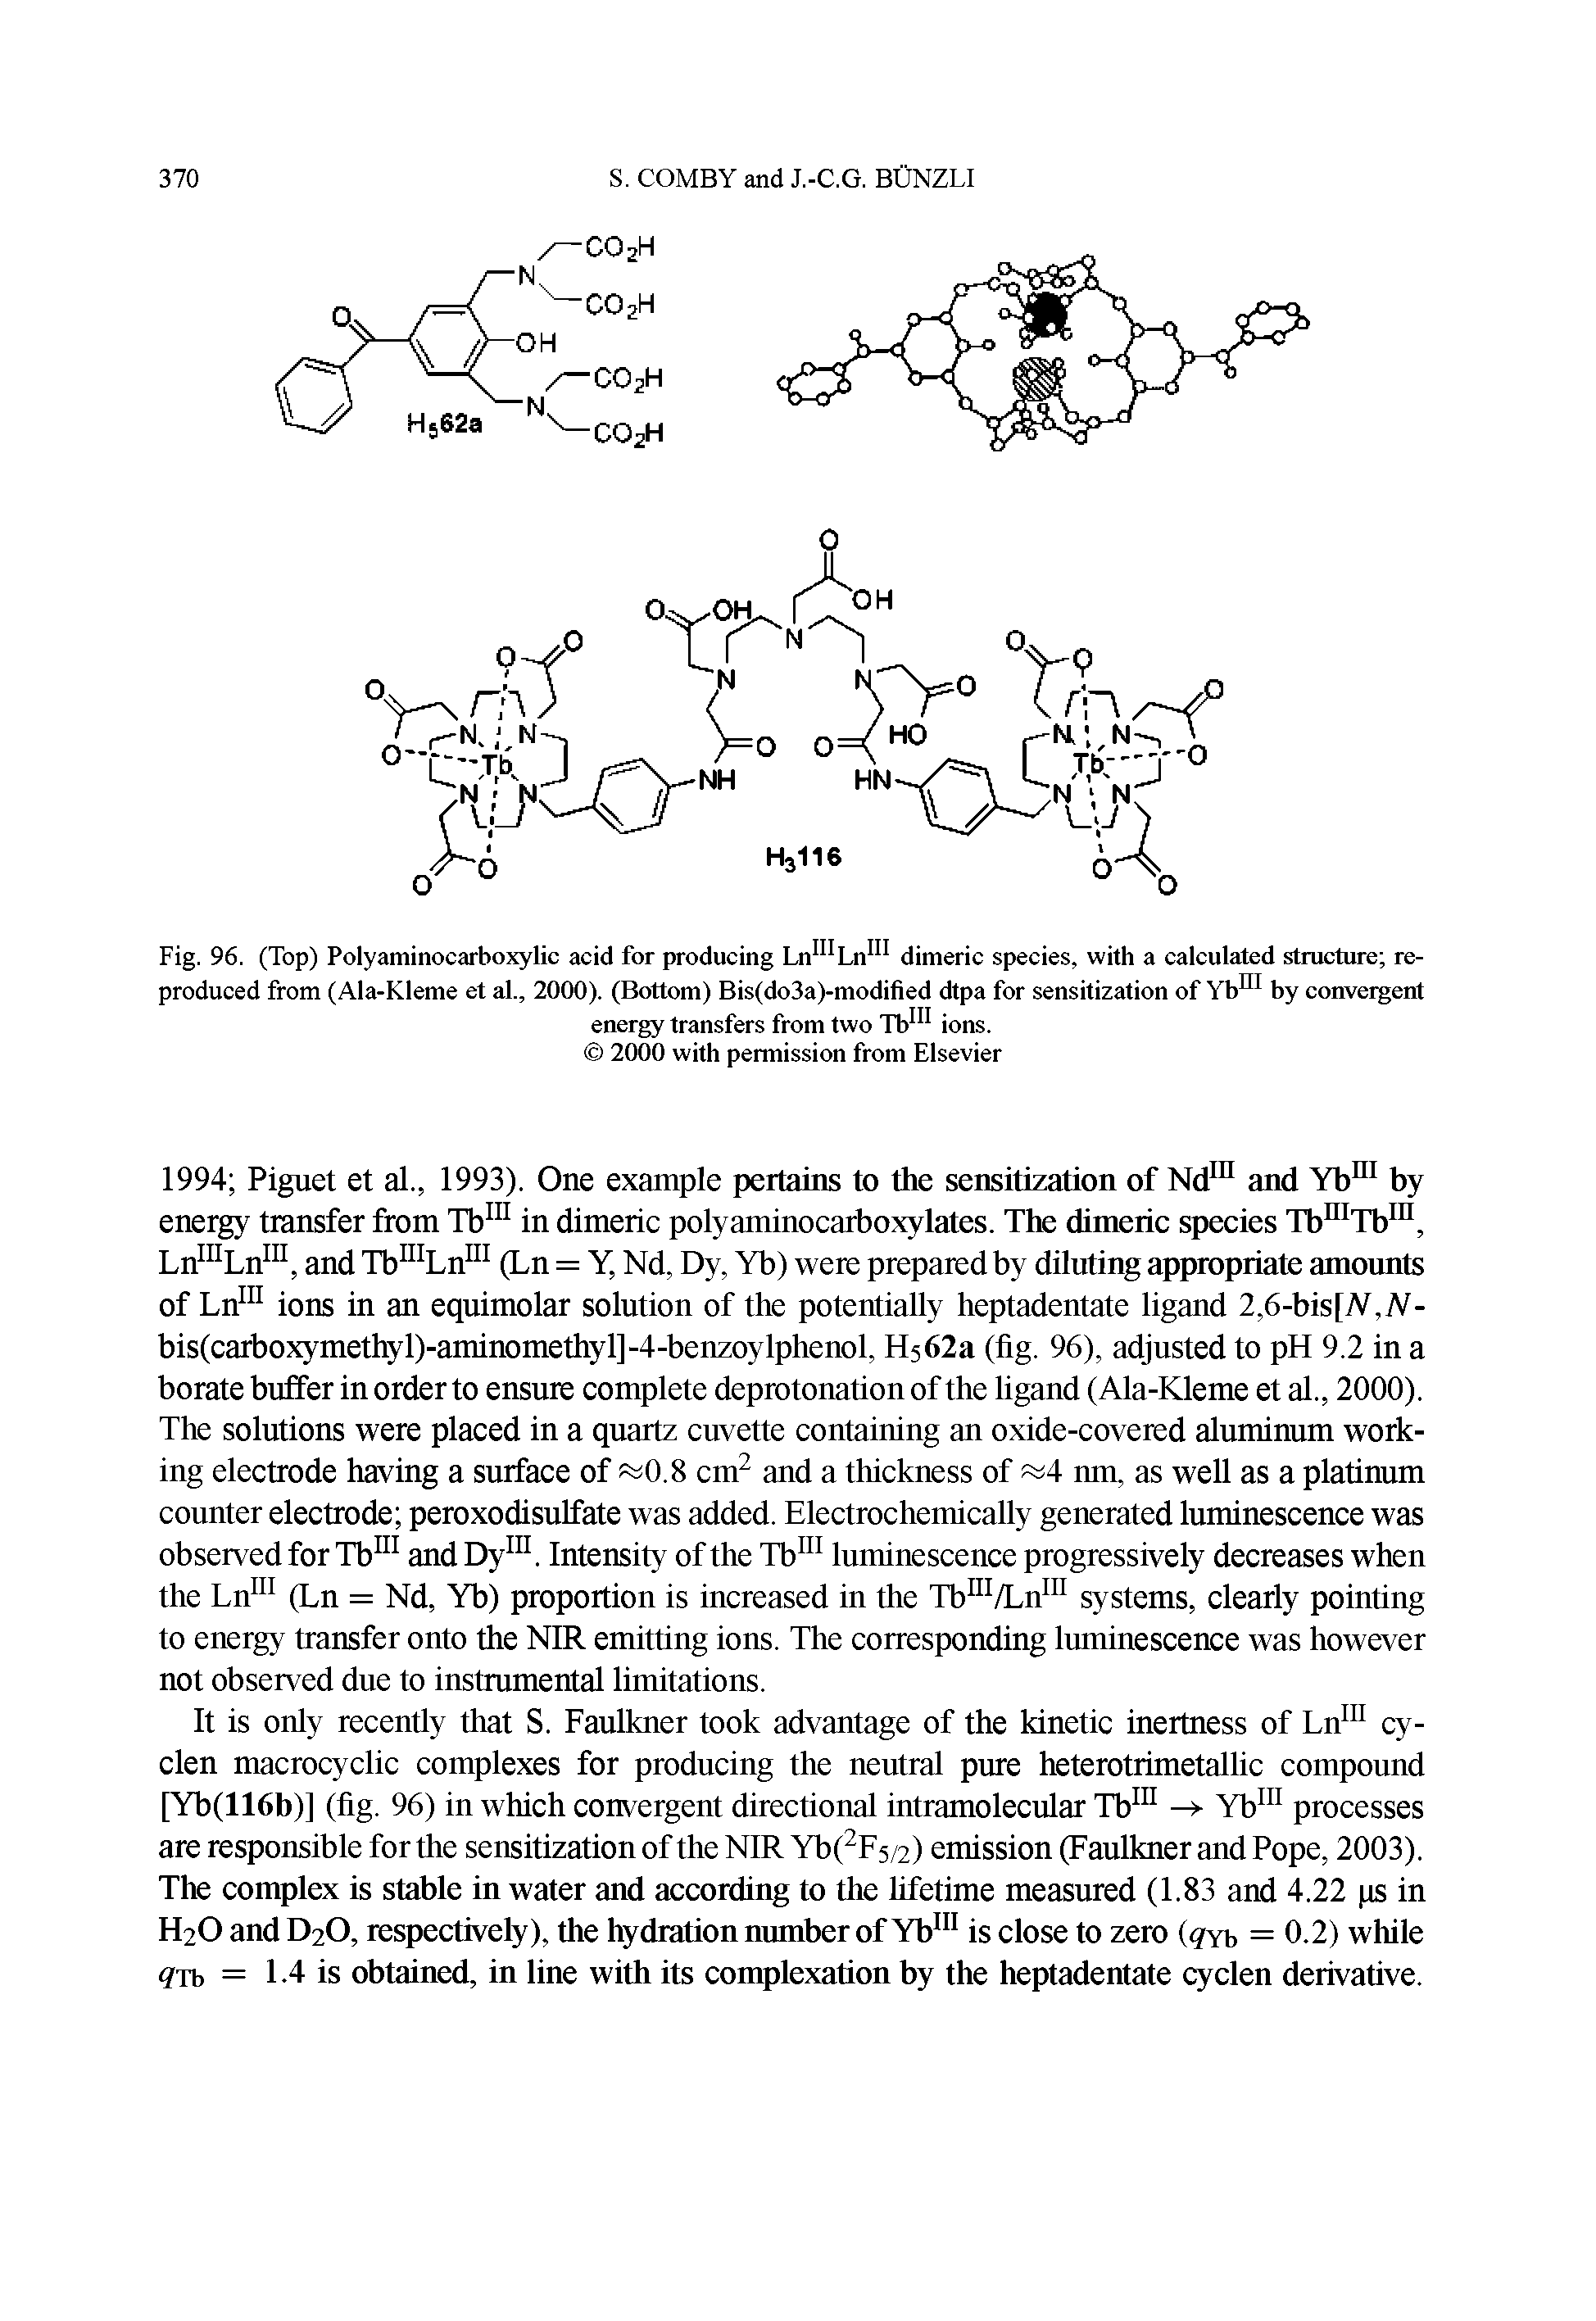 Fig. 96. (Top) Polyaminocarboxylic acid for producing Ln Ln111 dimeric species, with a calculated structure reproduced from (Ala-Kleme et al., 2000). (Bottom) Bis(do3a)-modified dtpa for sensitization of Ybnl by convergent...